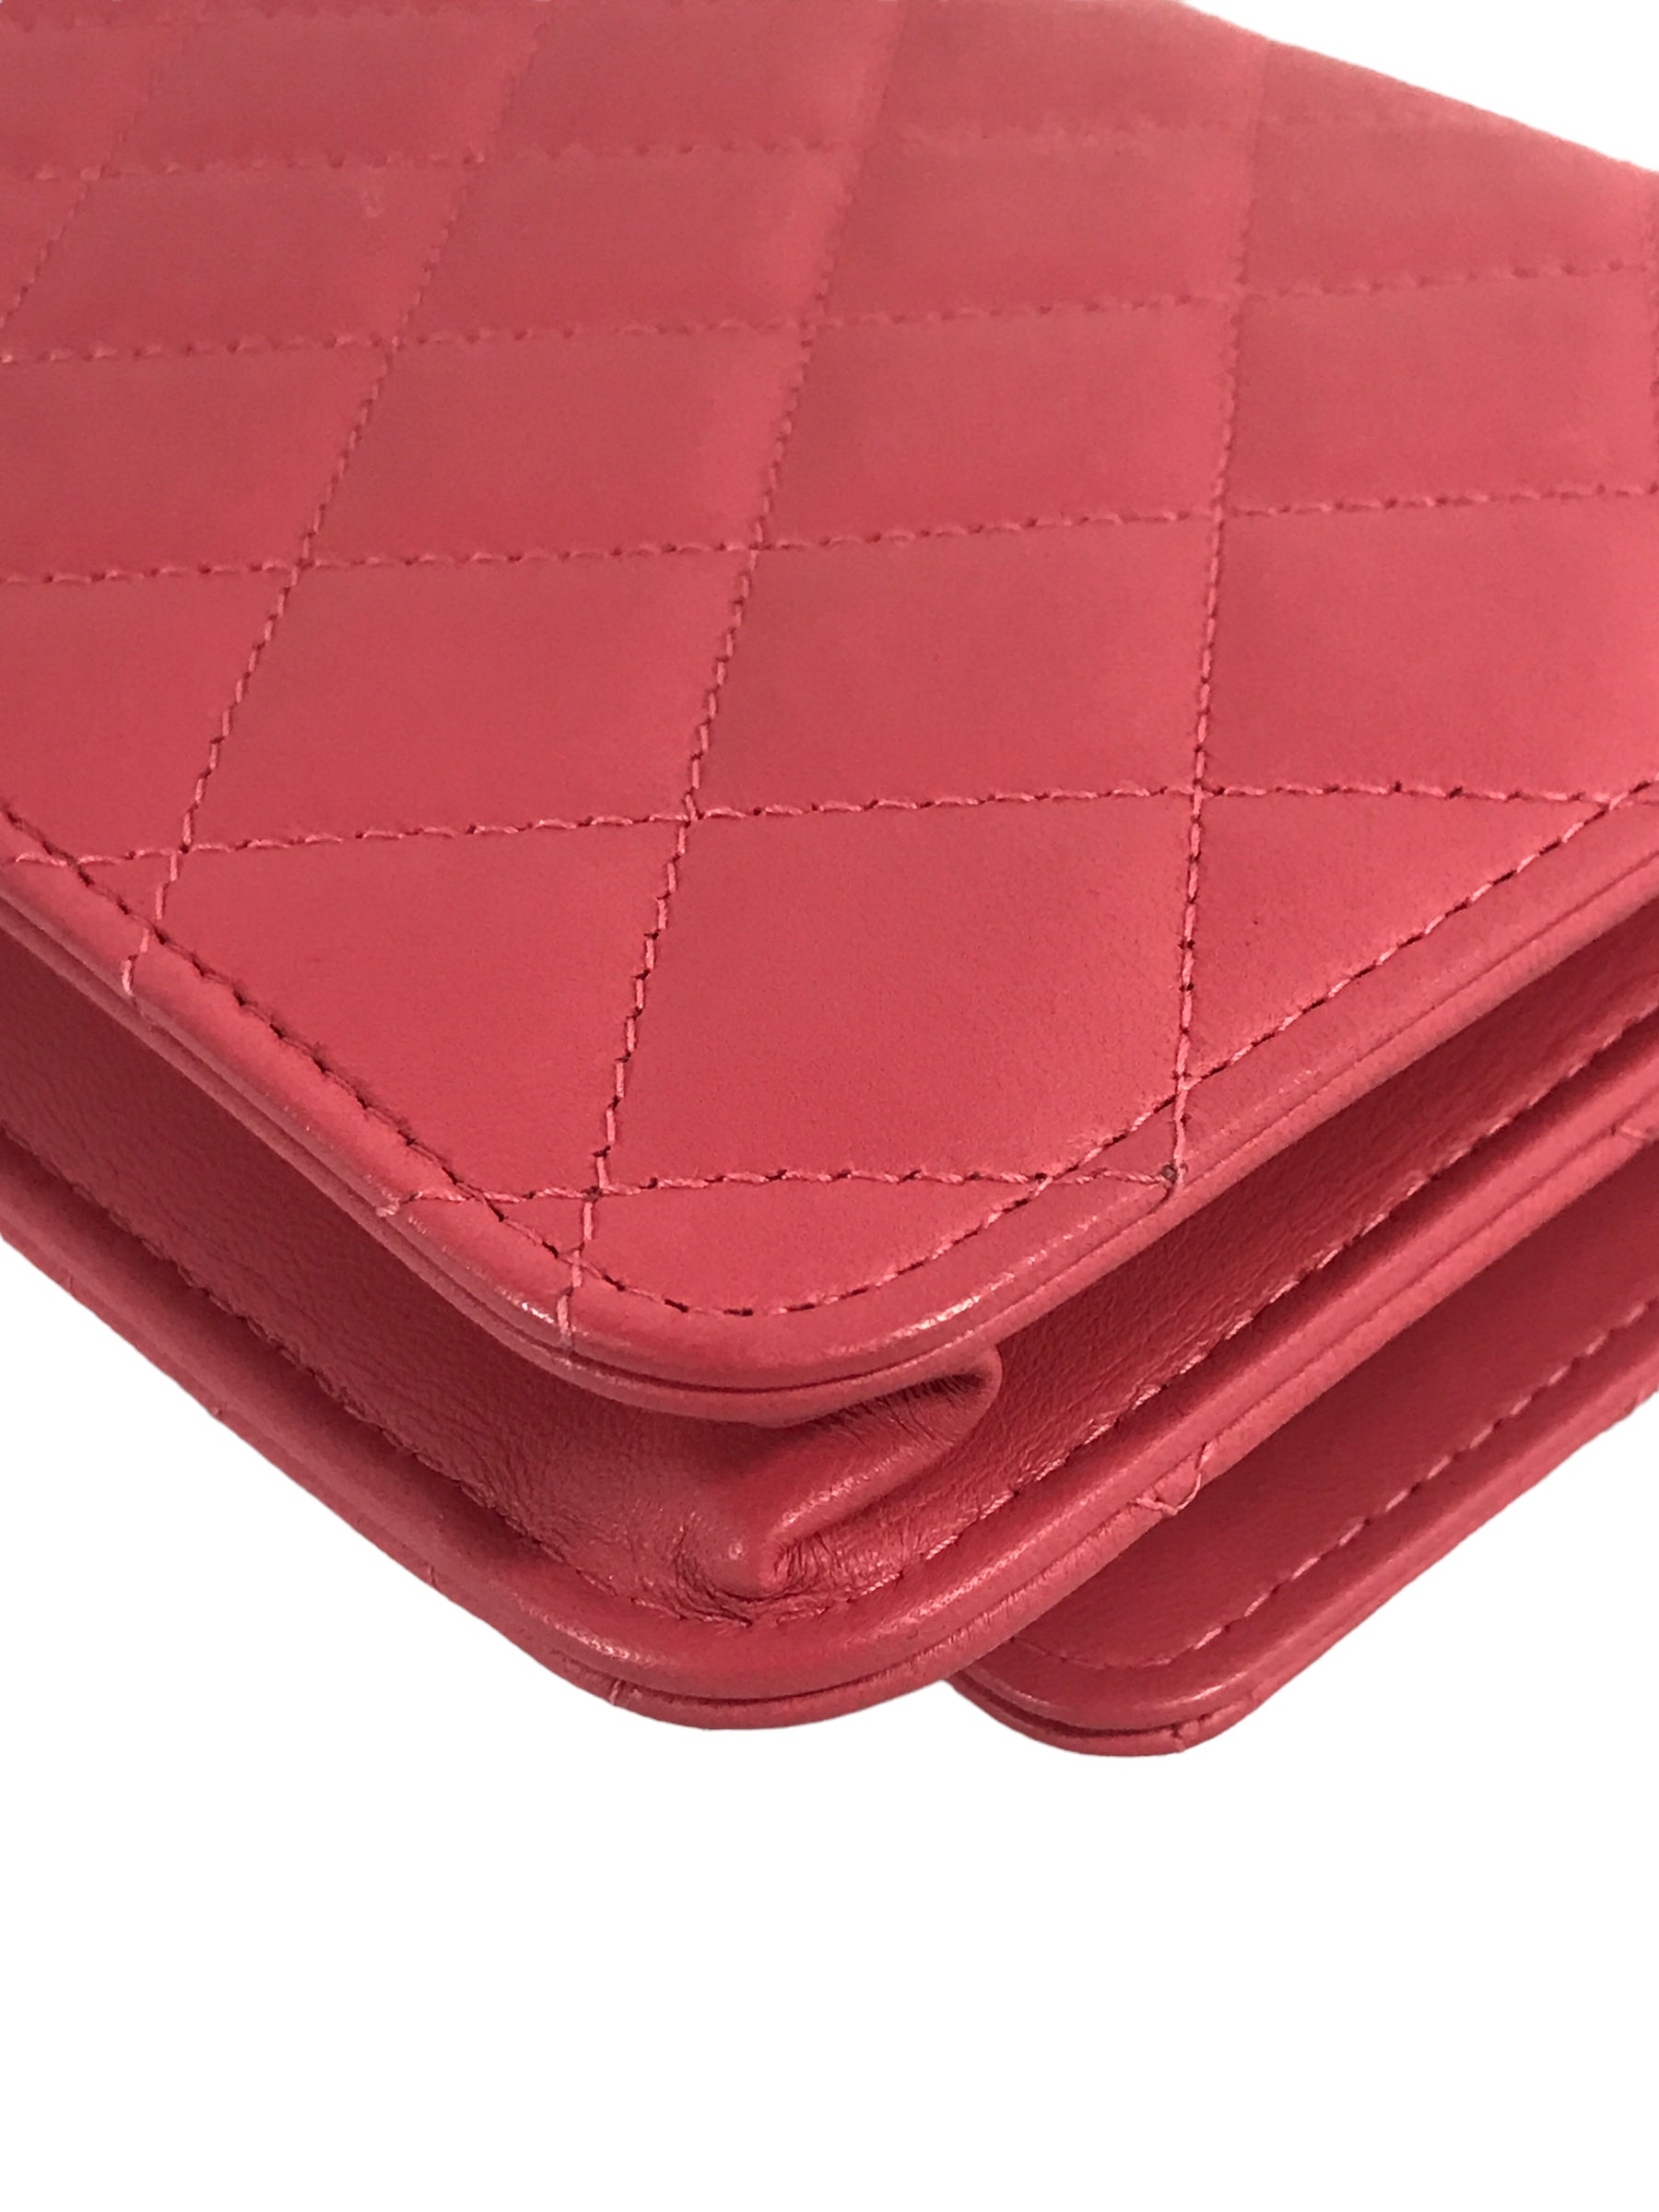 Bubblegum Pink Quilted Lambskin Leather Trendy Wallet On Chain W/GHW